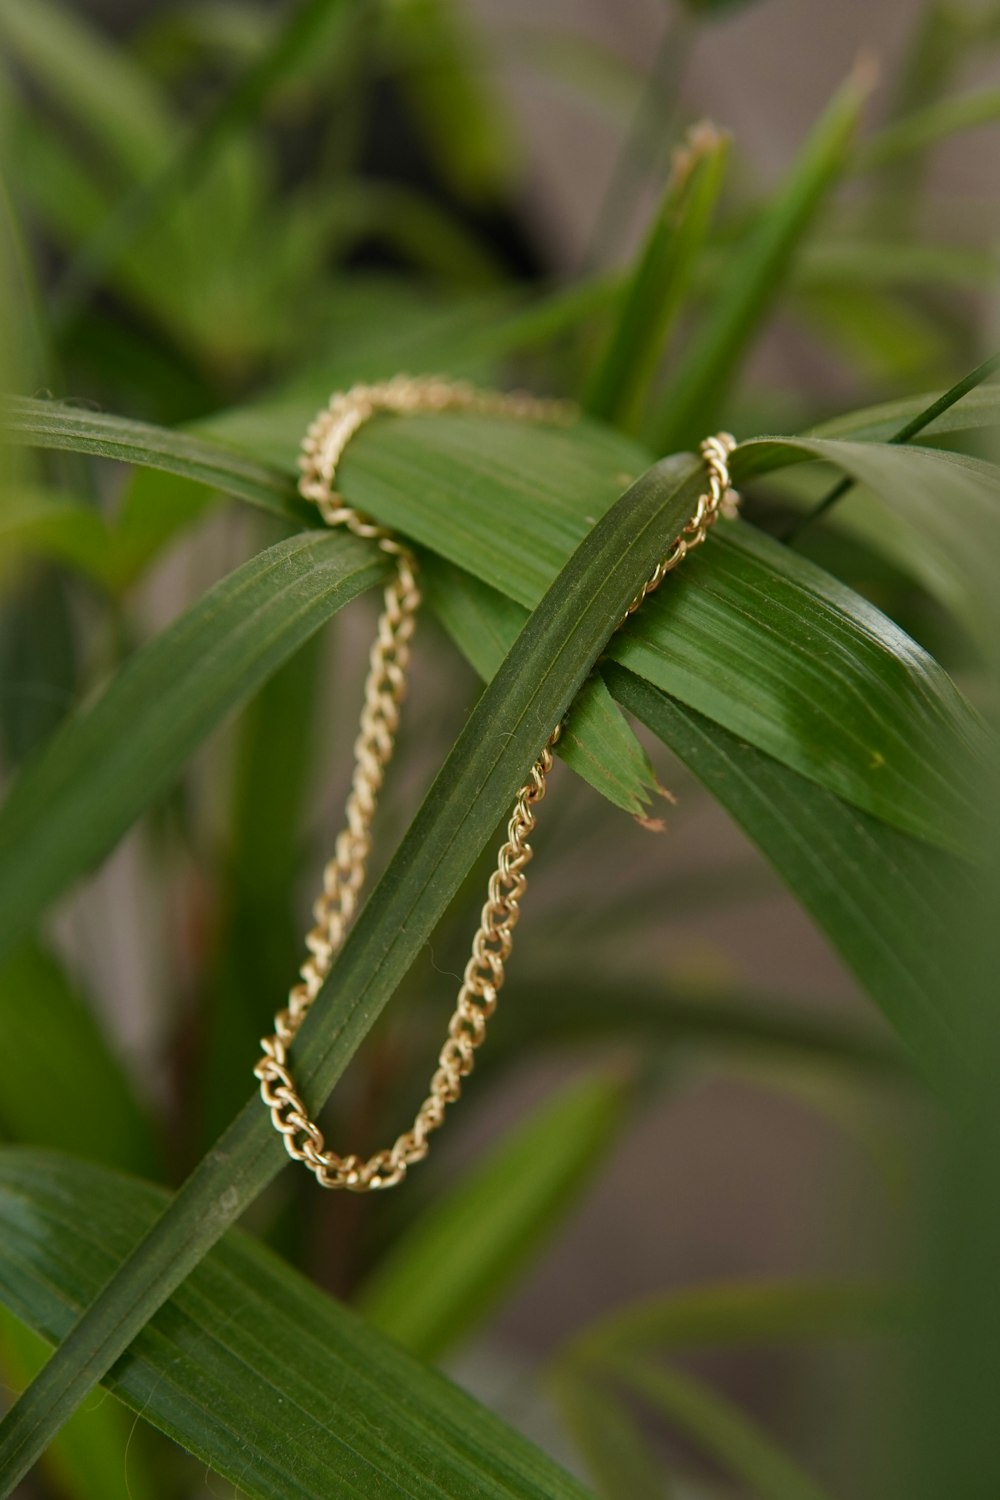 a close up of a chain on a plant